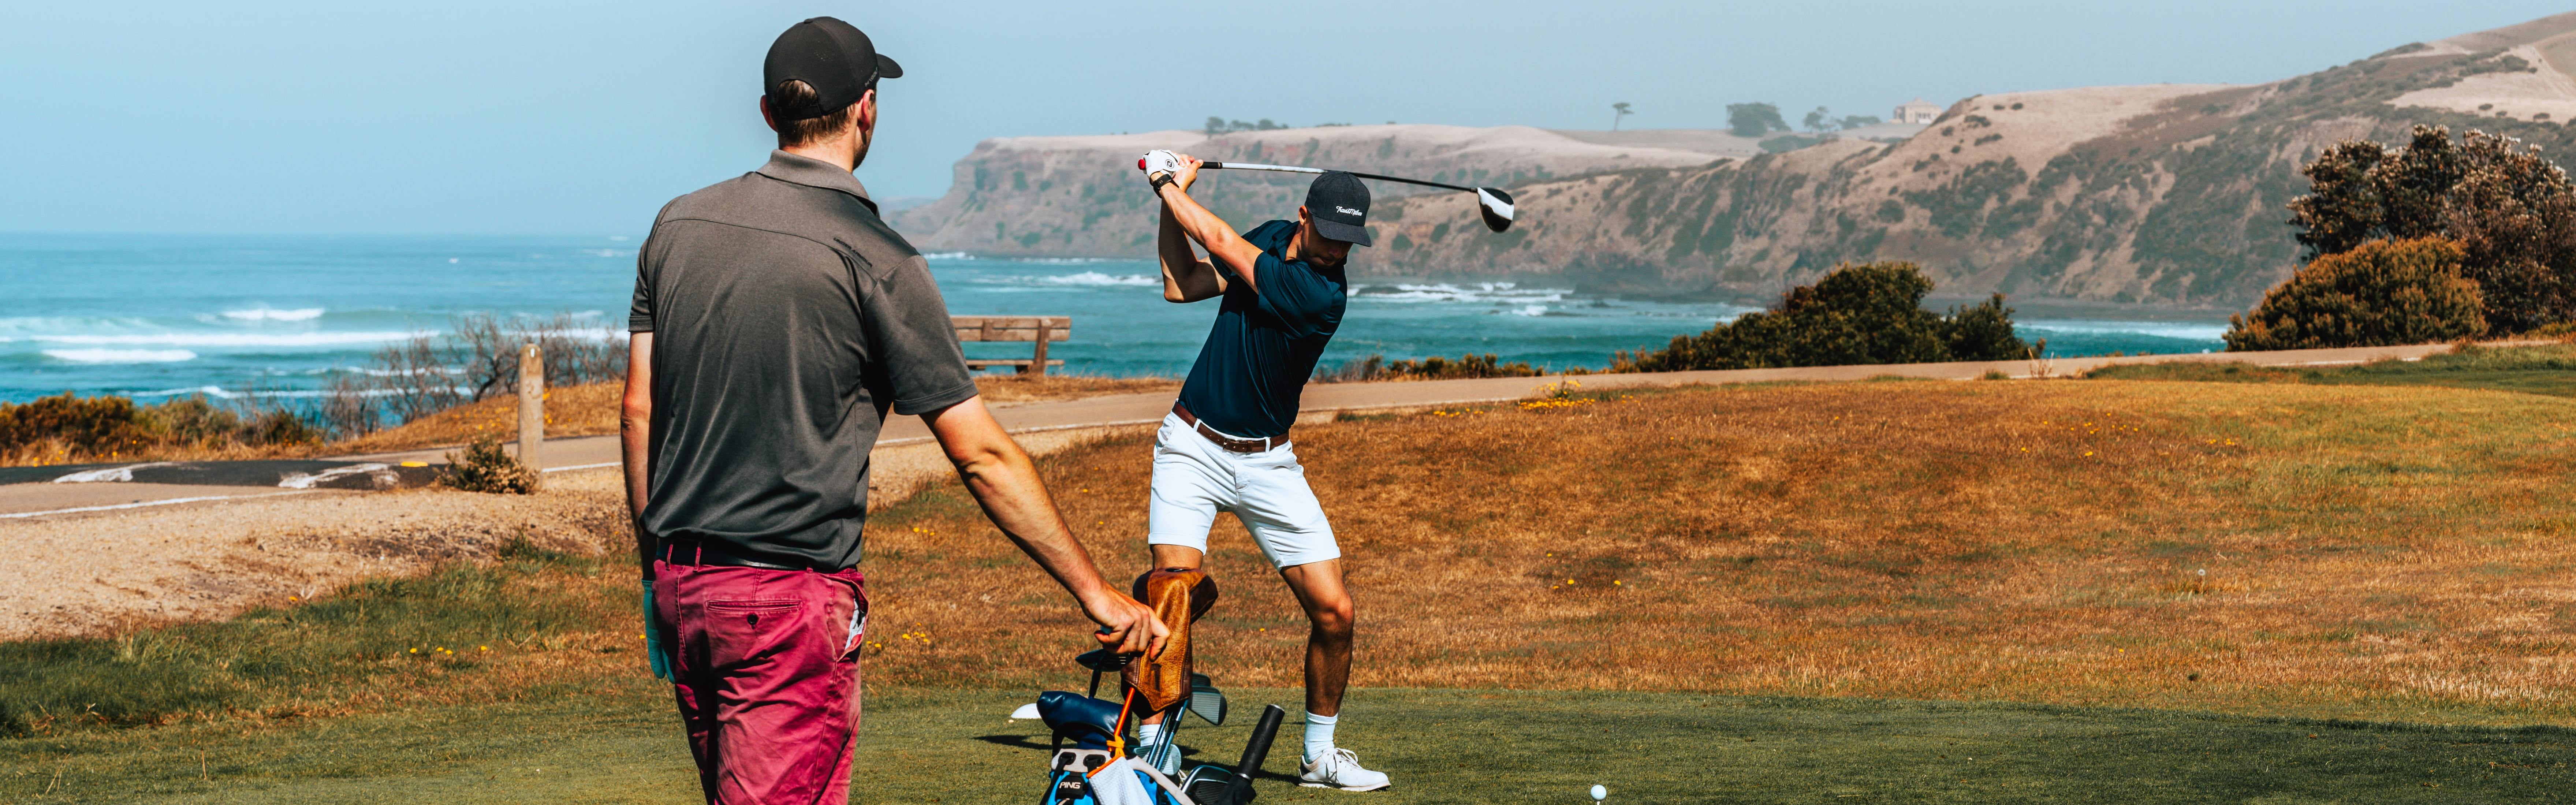 Two men golf on a course overlooking the ocean.